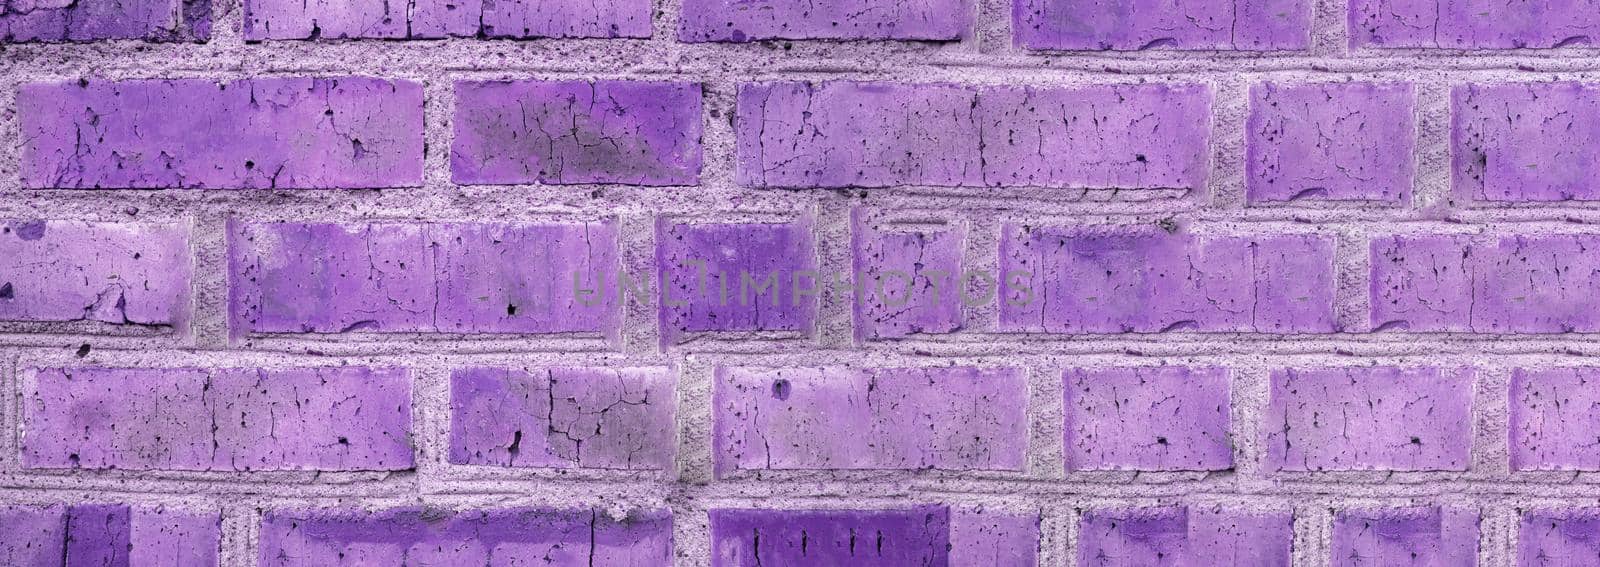 Banner background of an old brick wall, vintage brickwork texture, close-up, purple tinting.